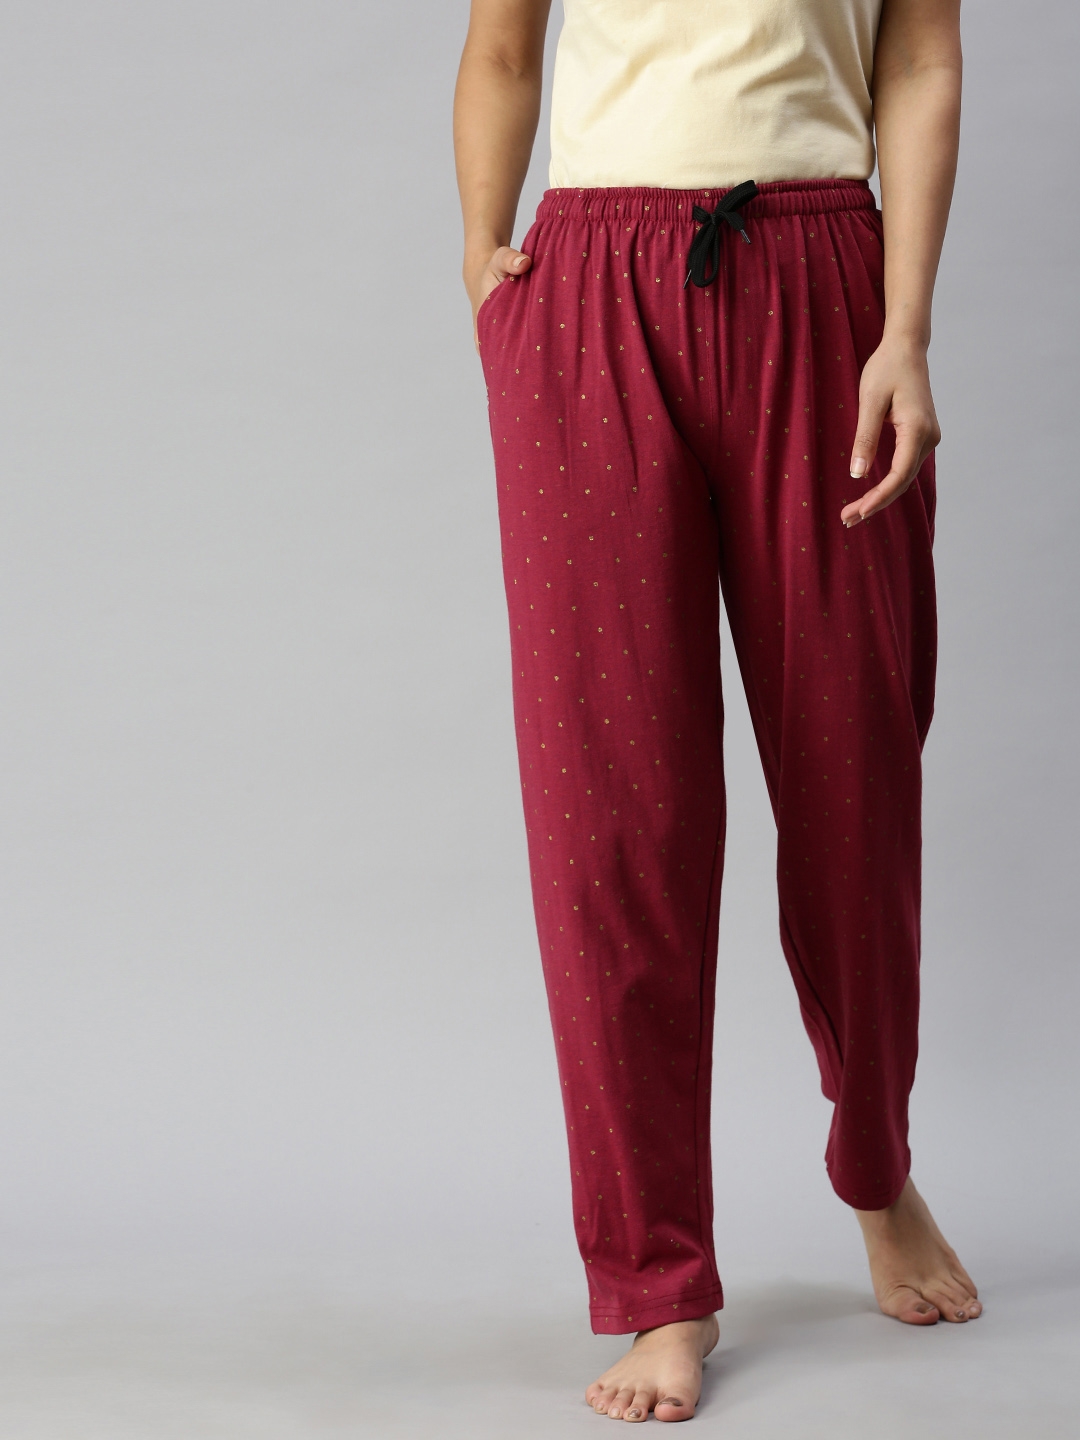 Kryptic | Kryptic Womens 100% Cotton Full Length Lounge Pants - Pack of 2 4